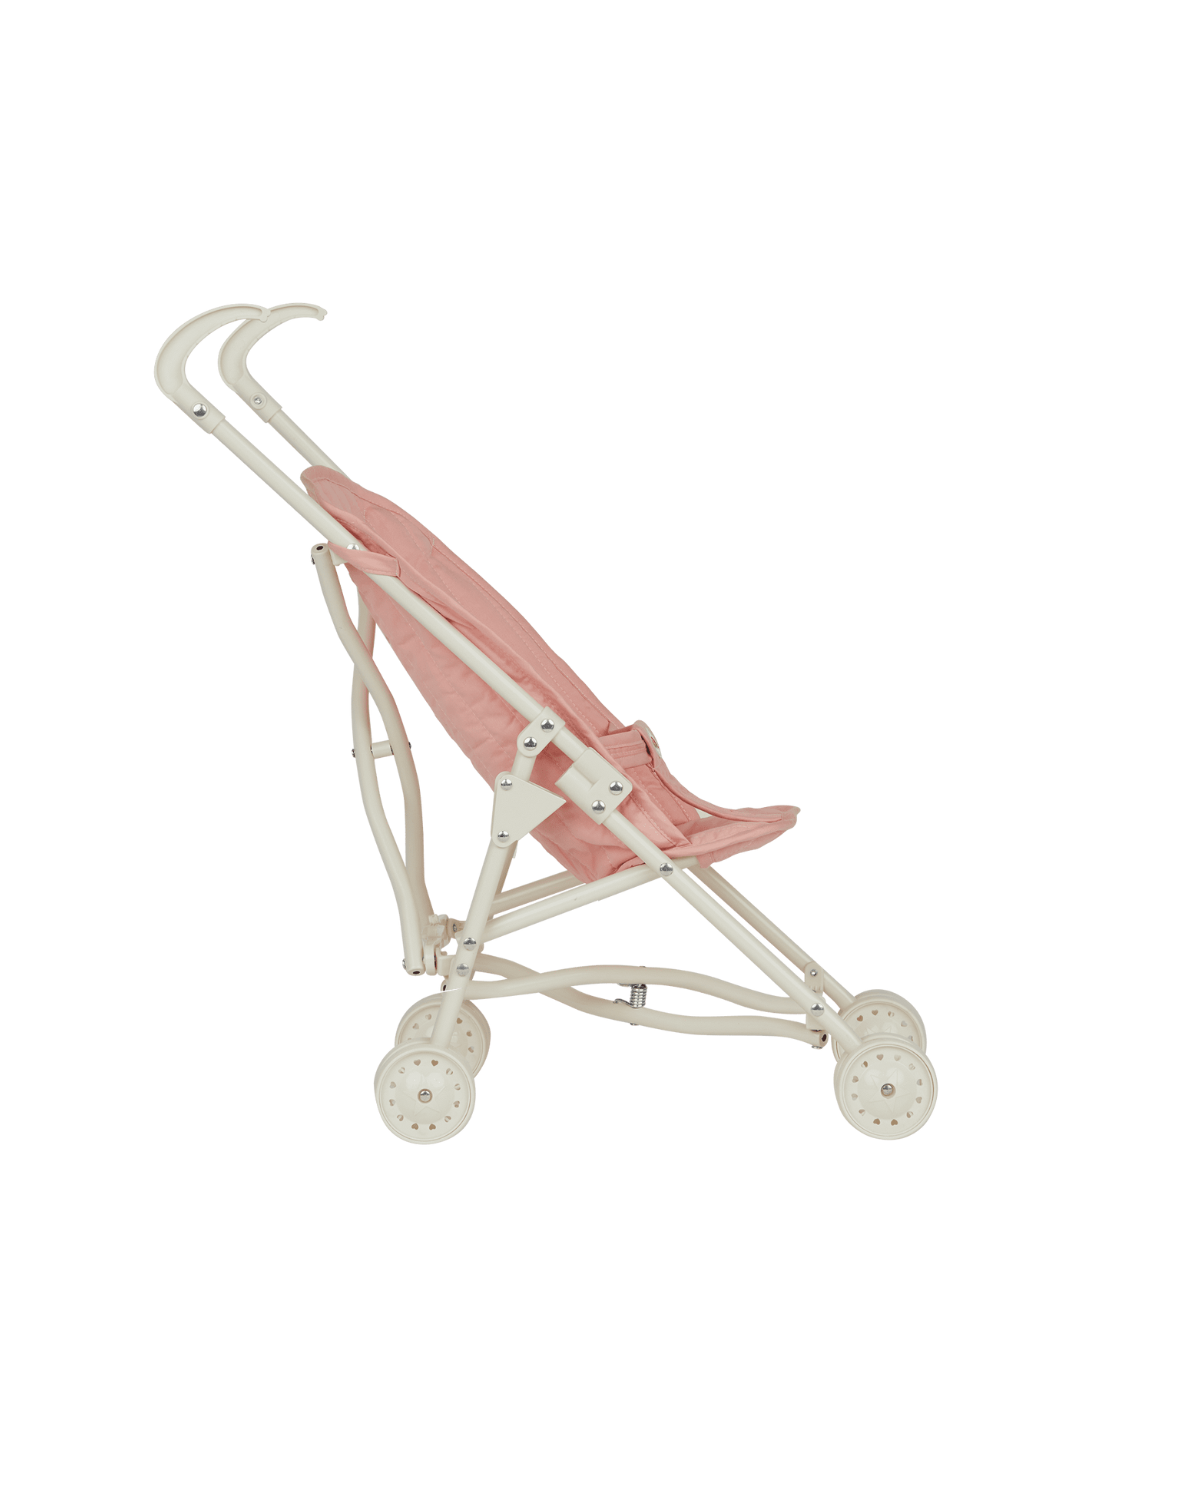 Sollie Stroller - Rose: Fun and Functional Toy